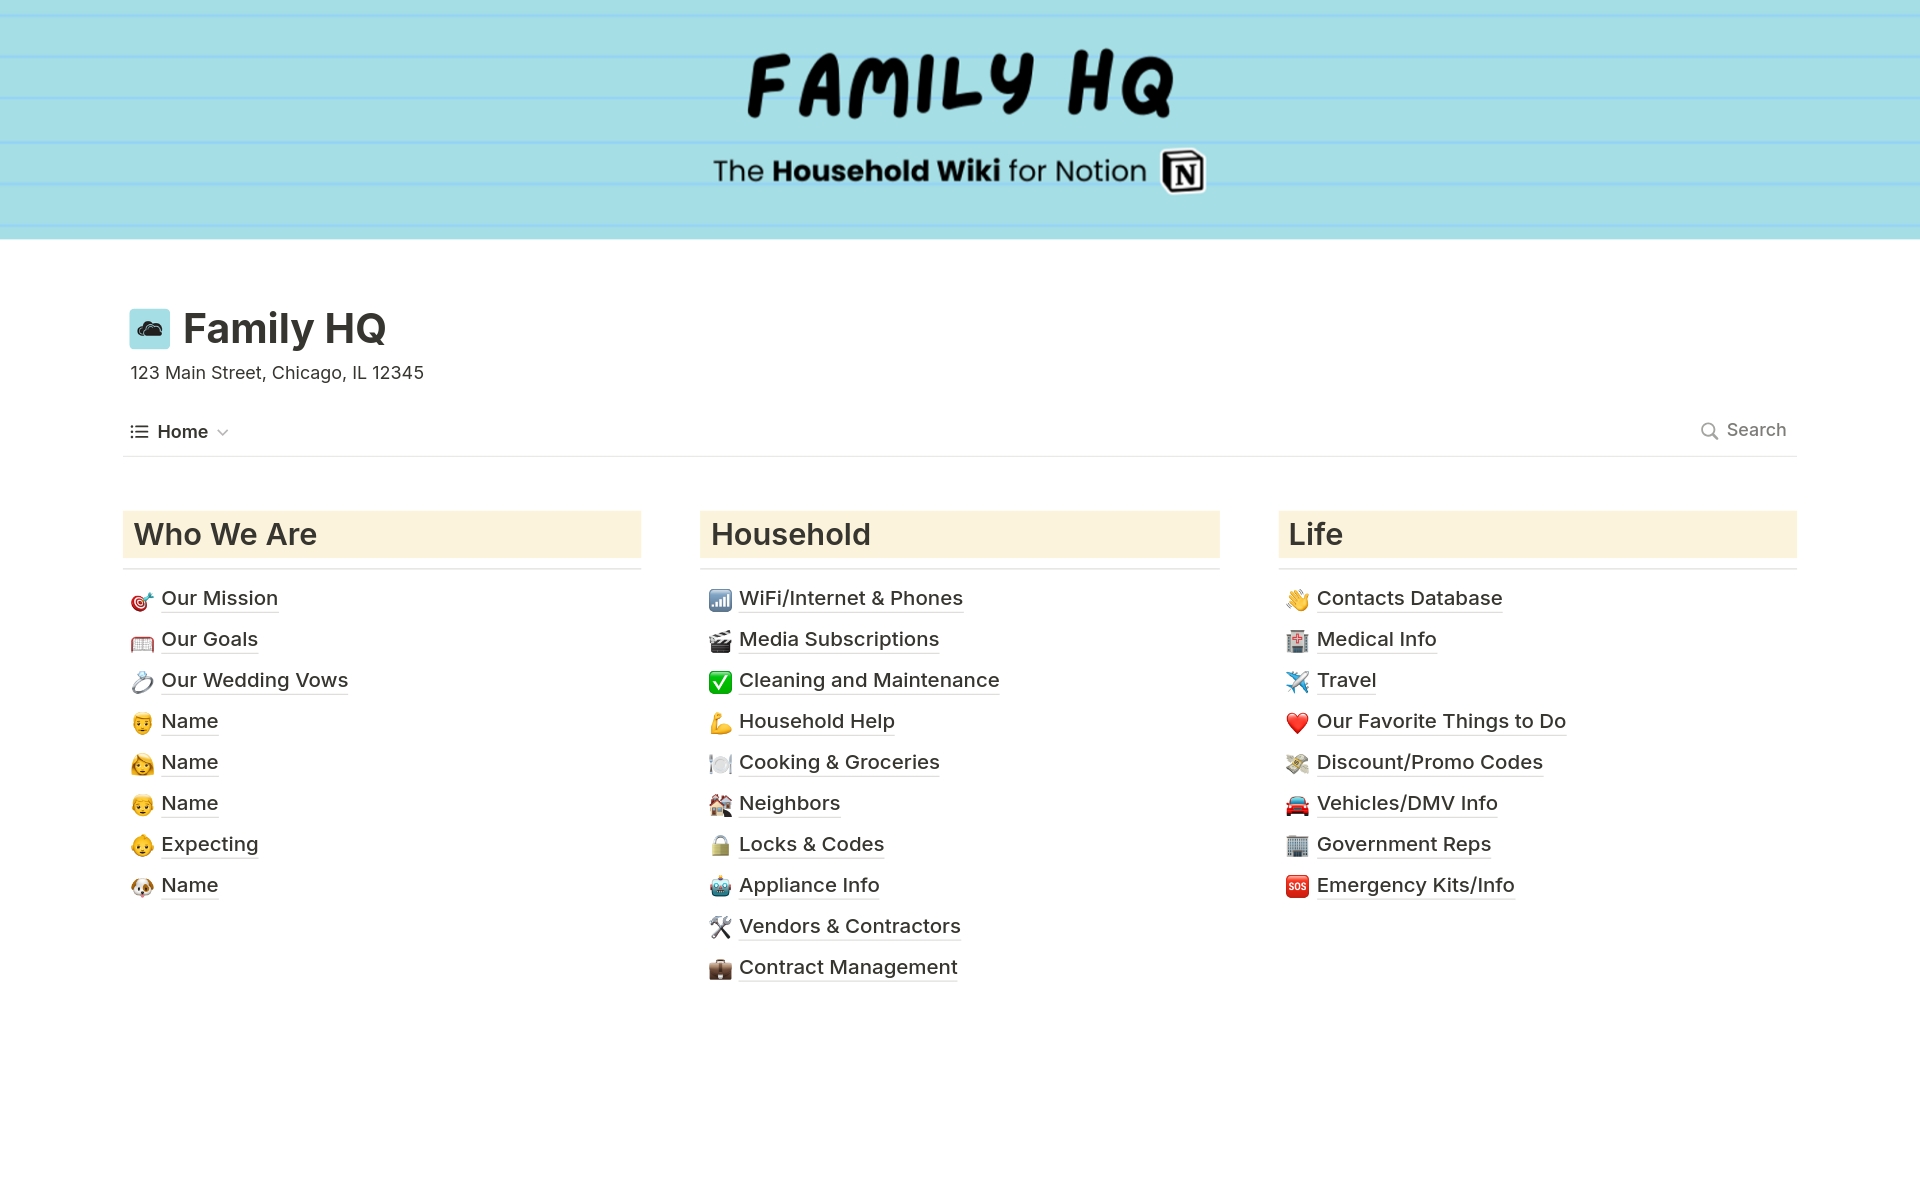 The Household Wiki for Notion is everything you've never thought of and more - saving your family from countless hours of looking for information.